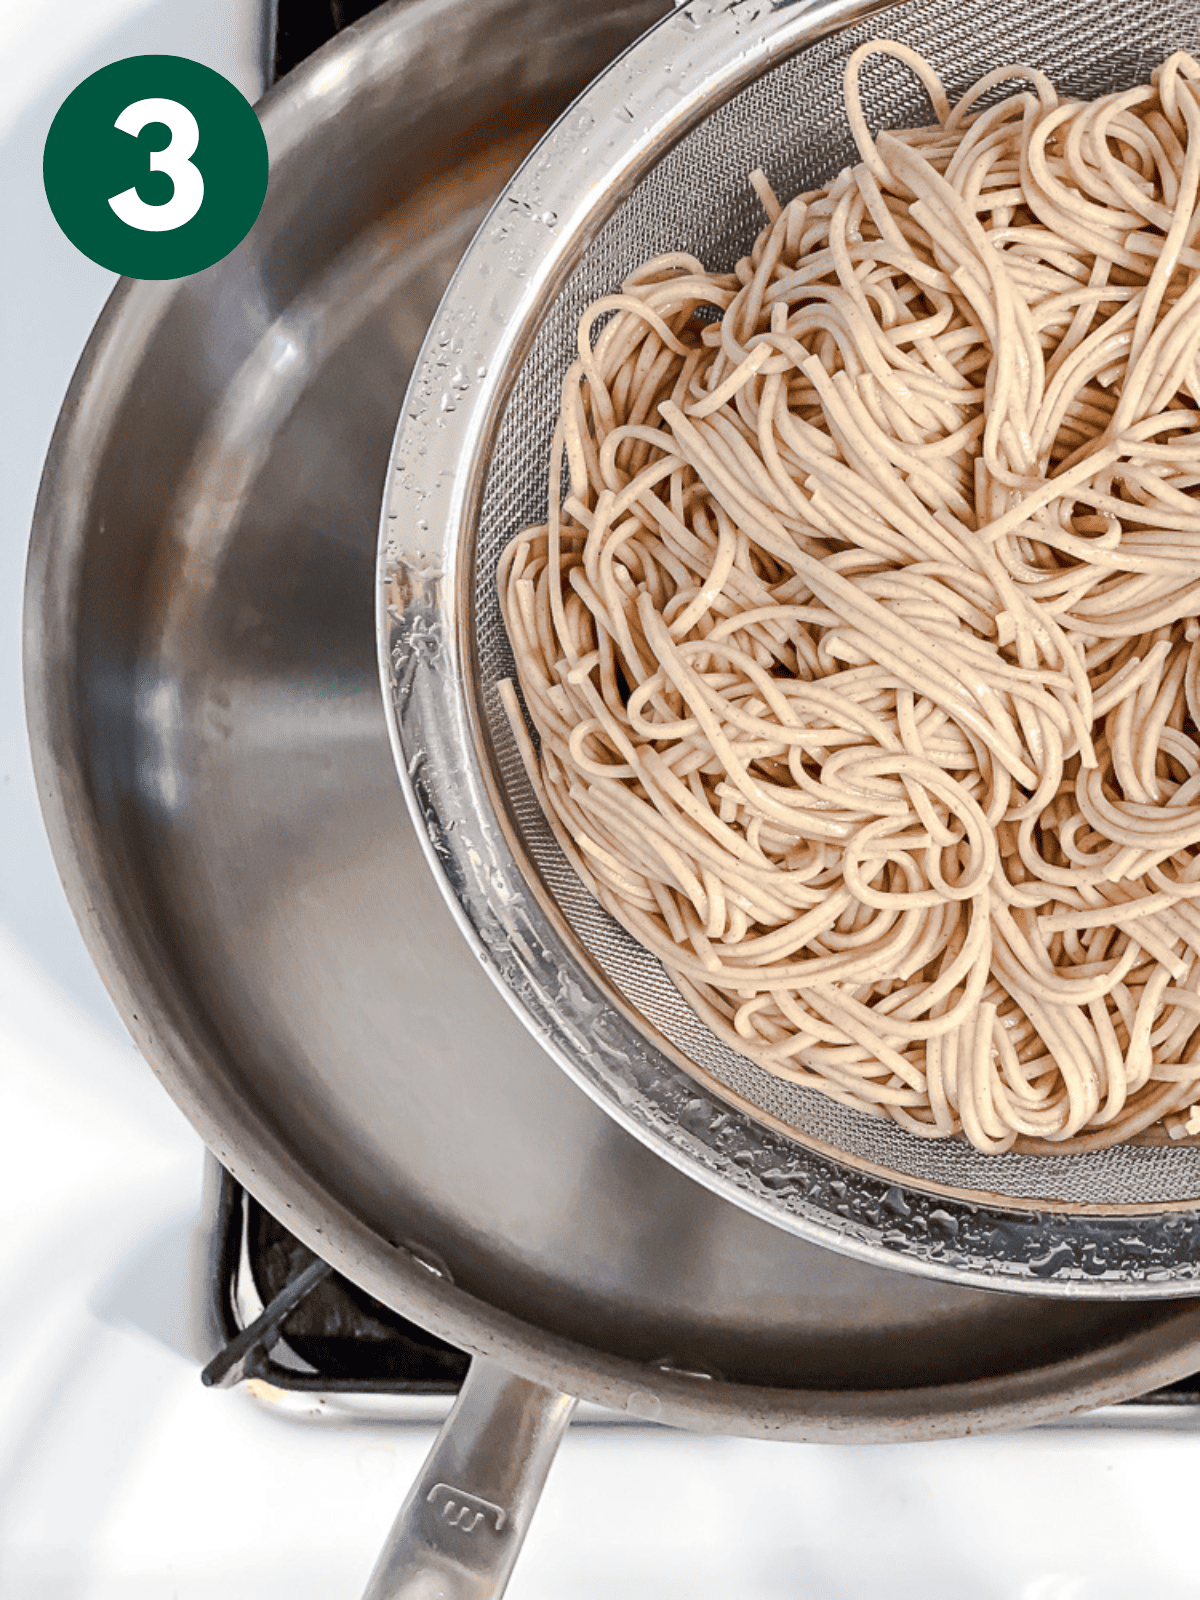 draining cooked soba noodles in a metal colander.